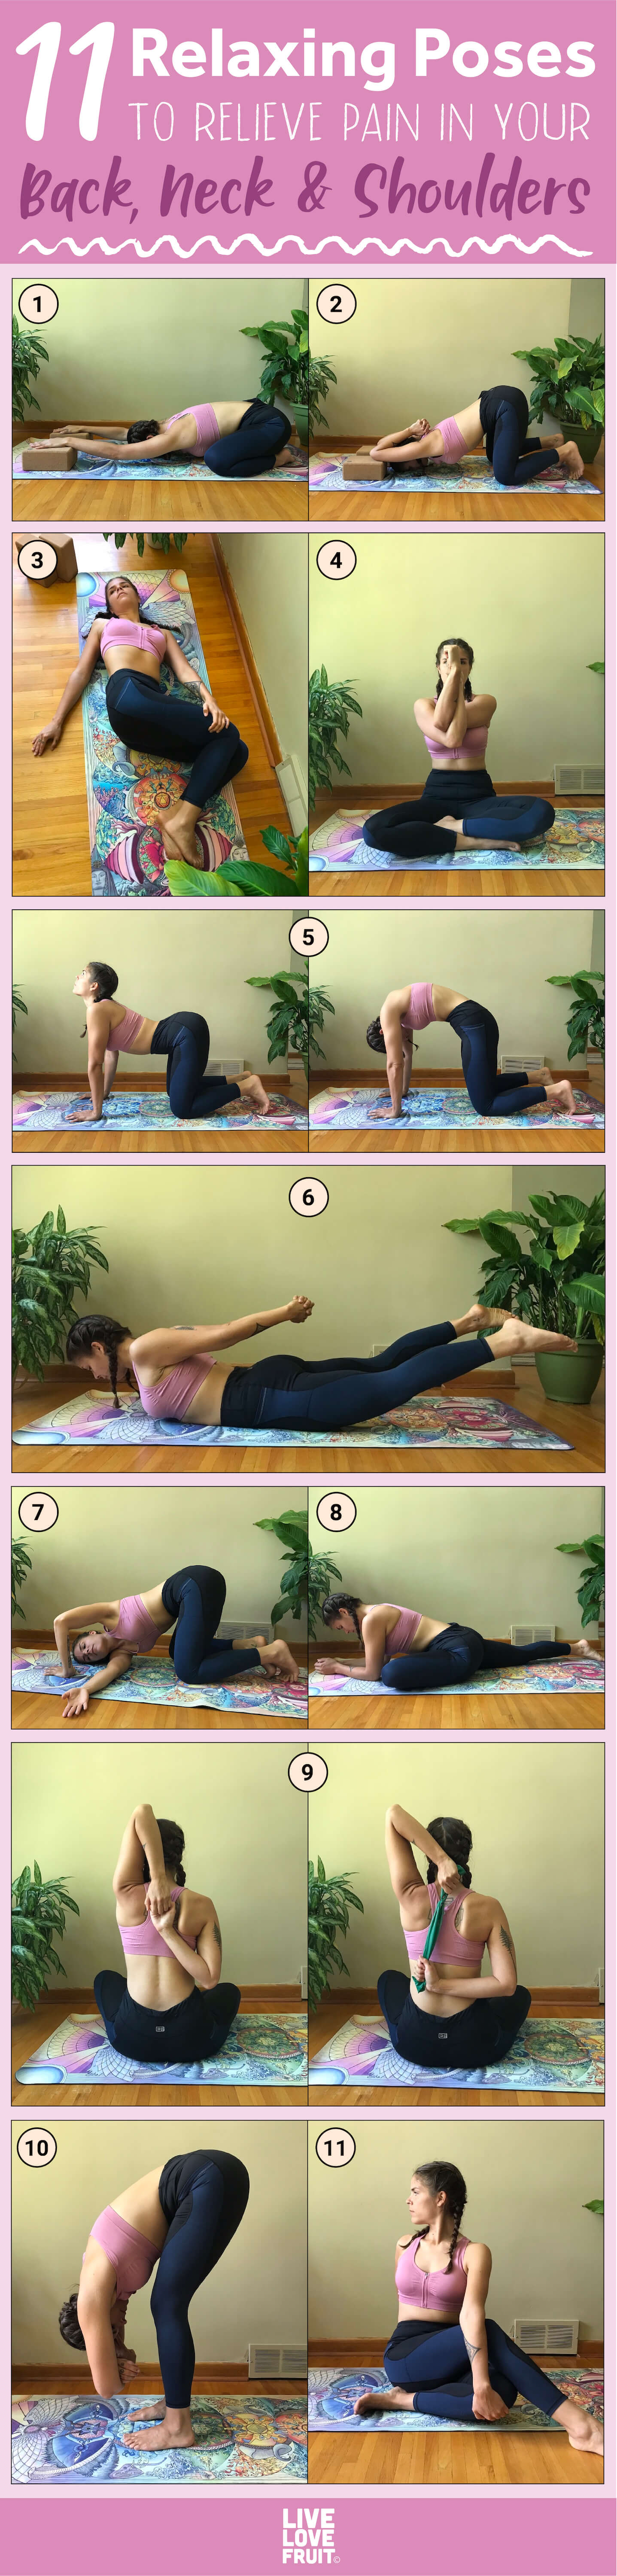 A series of different stretches to help relieve back and shoulder pain with text - 11 relaxing poses to relieve pain in your back, neck and shoulders